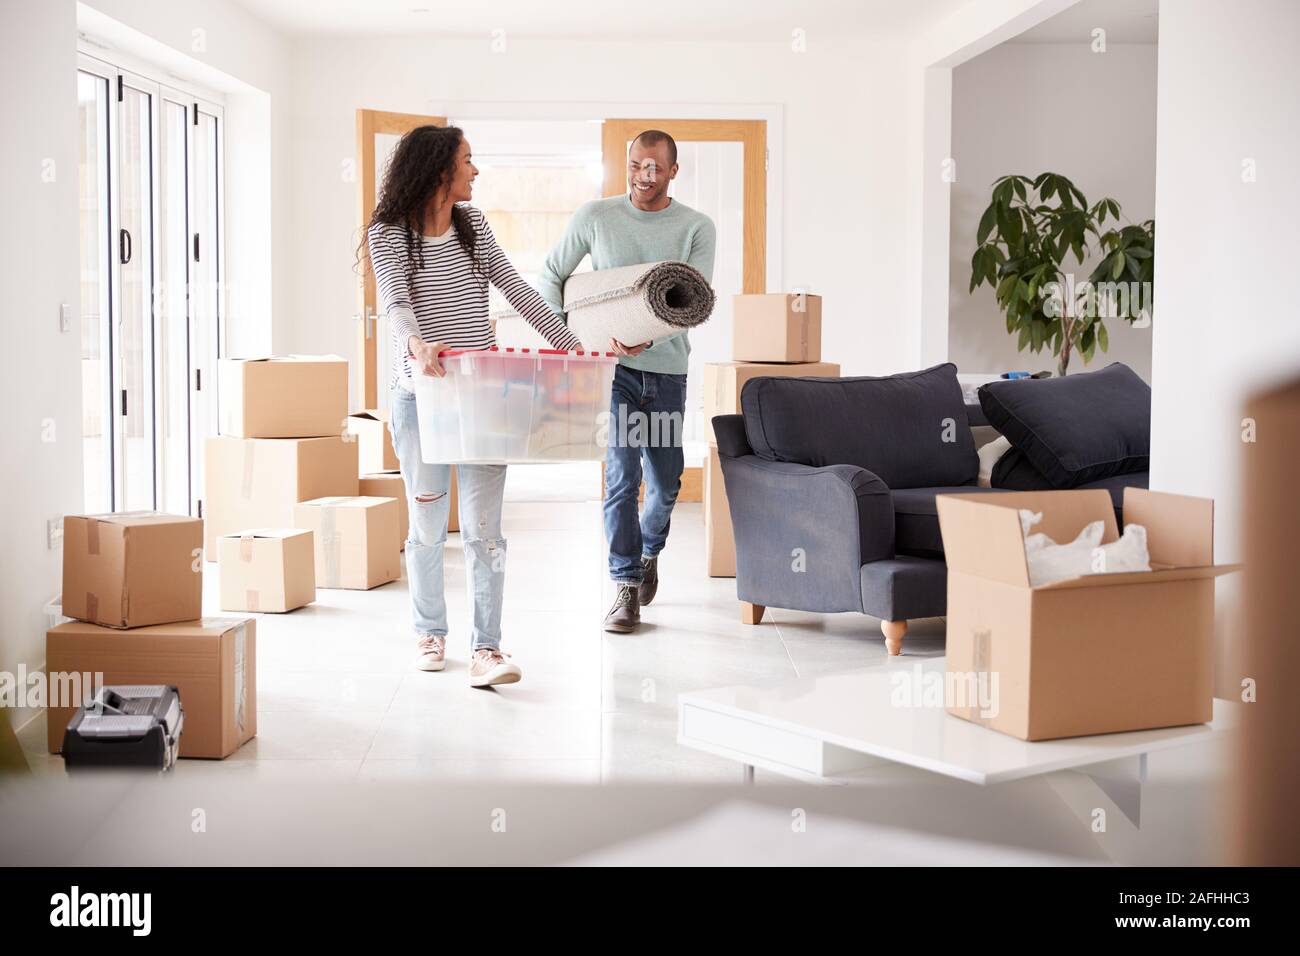 Smiling Couple Carrying Boxes Into New Home On Moving Day Stock Photo